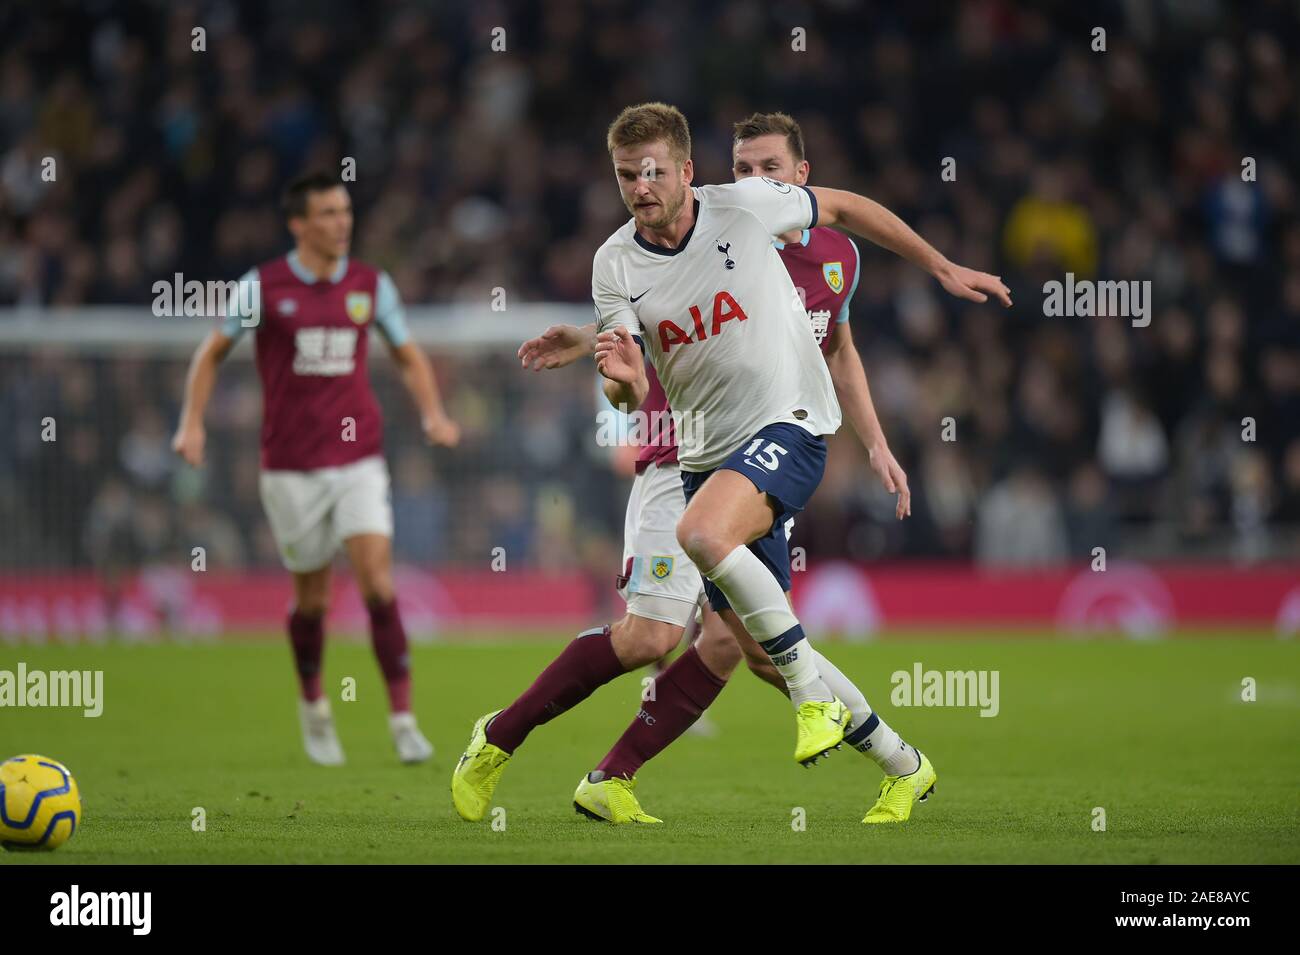 London, UK. 7th December 2019. Eric Dier of Tottenham Hotspur during the Tottenham Hotspur vs Burnley Premier League Football match at the Tottenham Hotspur Stadium on 7th December 2019-EDITORIAL USE ONLY No use with unauthorised audio, video, data, fixture lists (outside the EU), club/league logos or 'live' services. Online in-match use limited to 45 images (+15 in extra time). No use to emulate moving images. No use in betting, games or single club/league/player publications/services- Credit: Martin Dalton/Alamy Live News Stock Photo